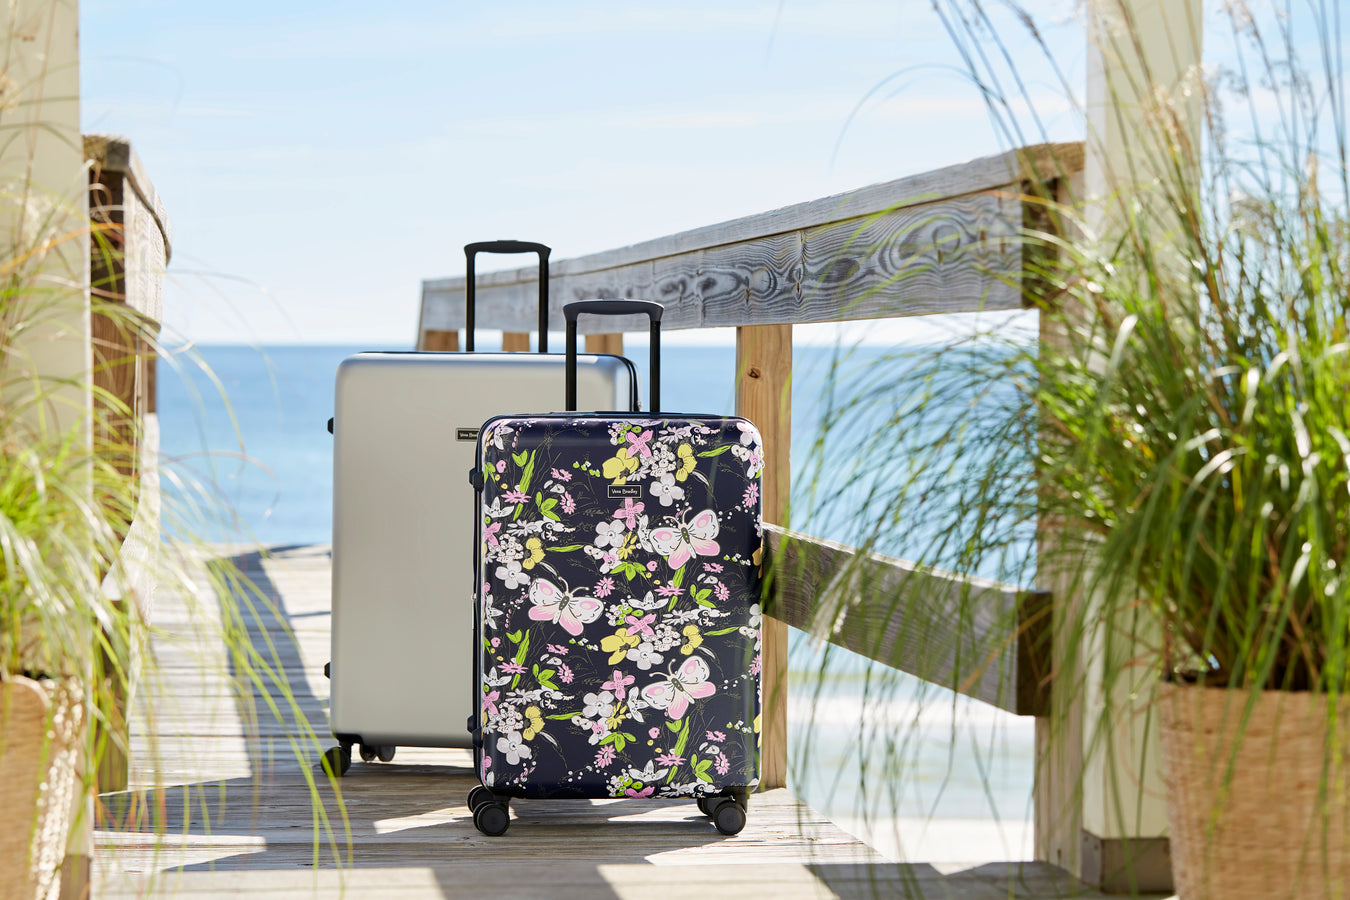 Two pieces of luggage on boardwalk